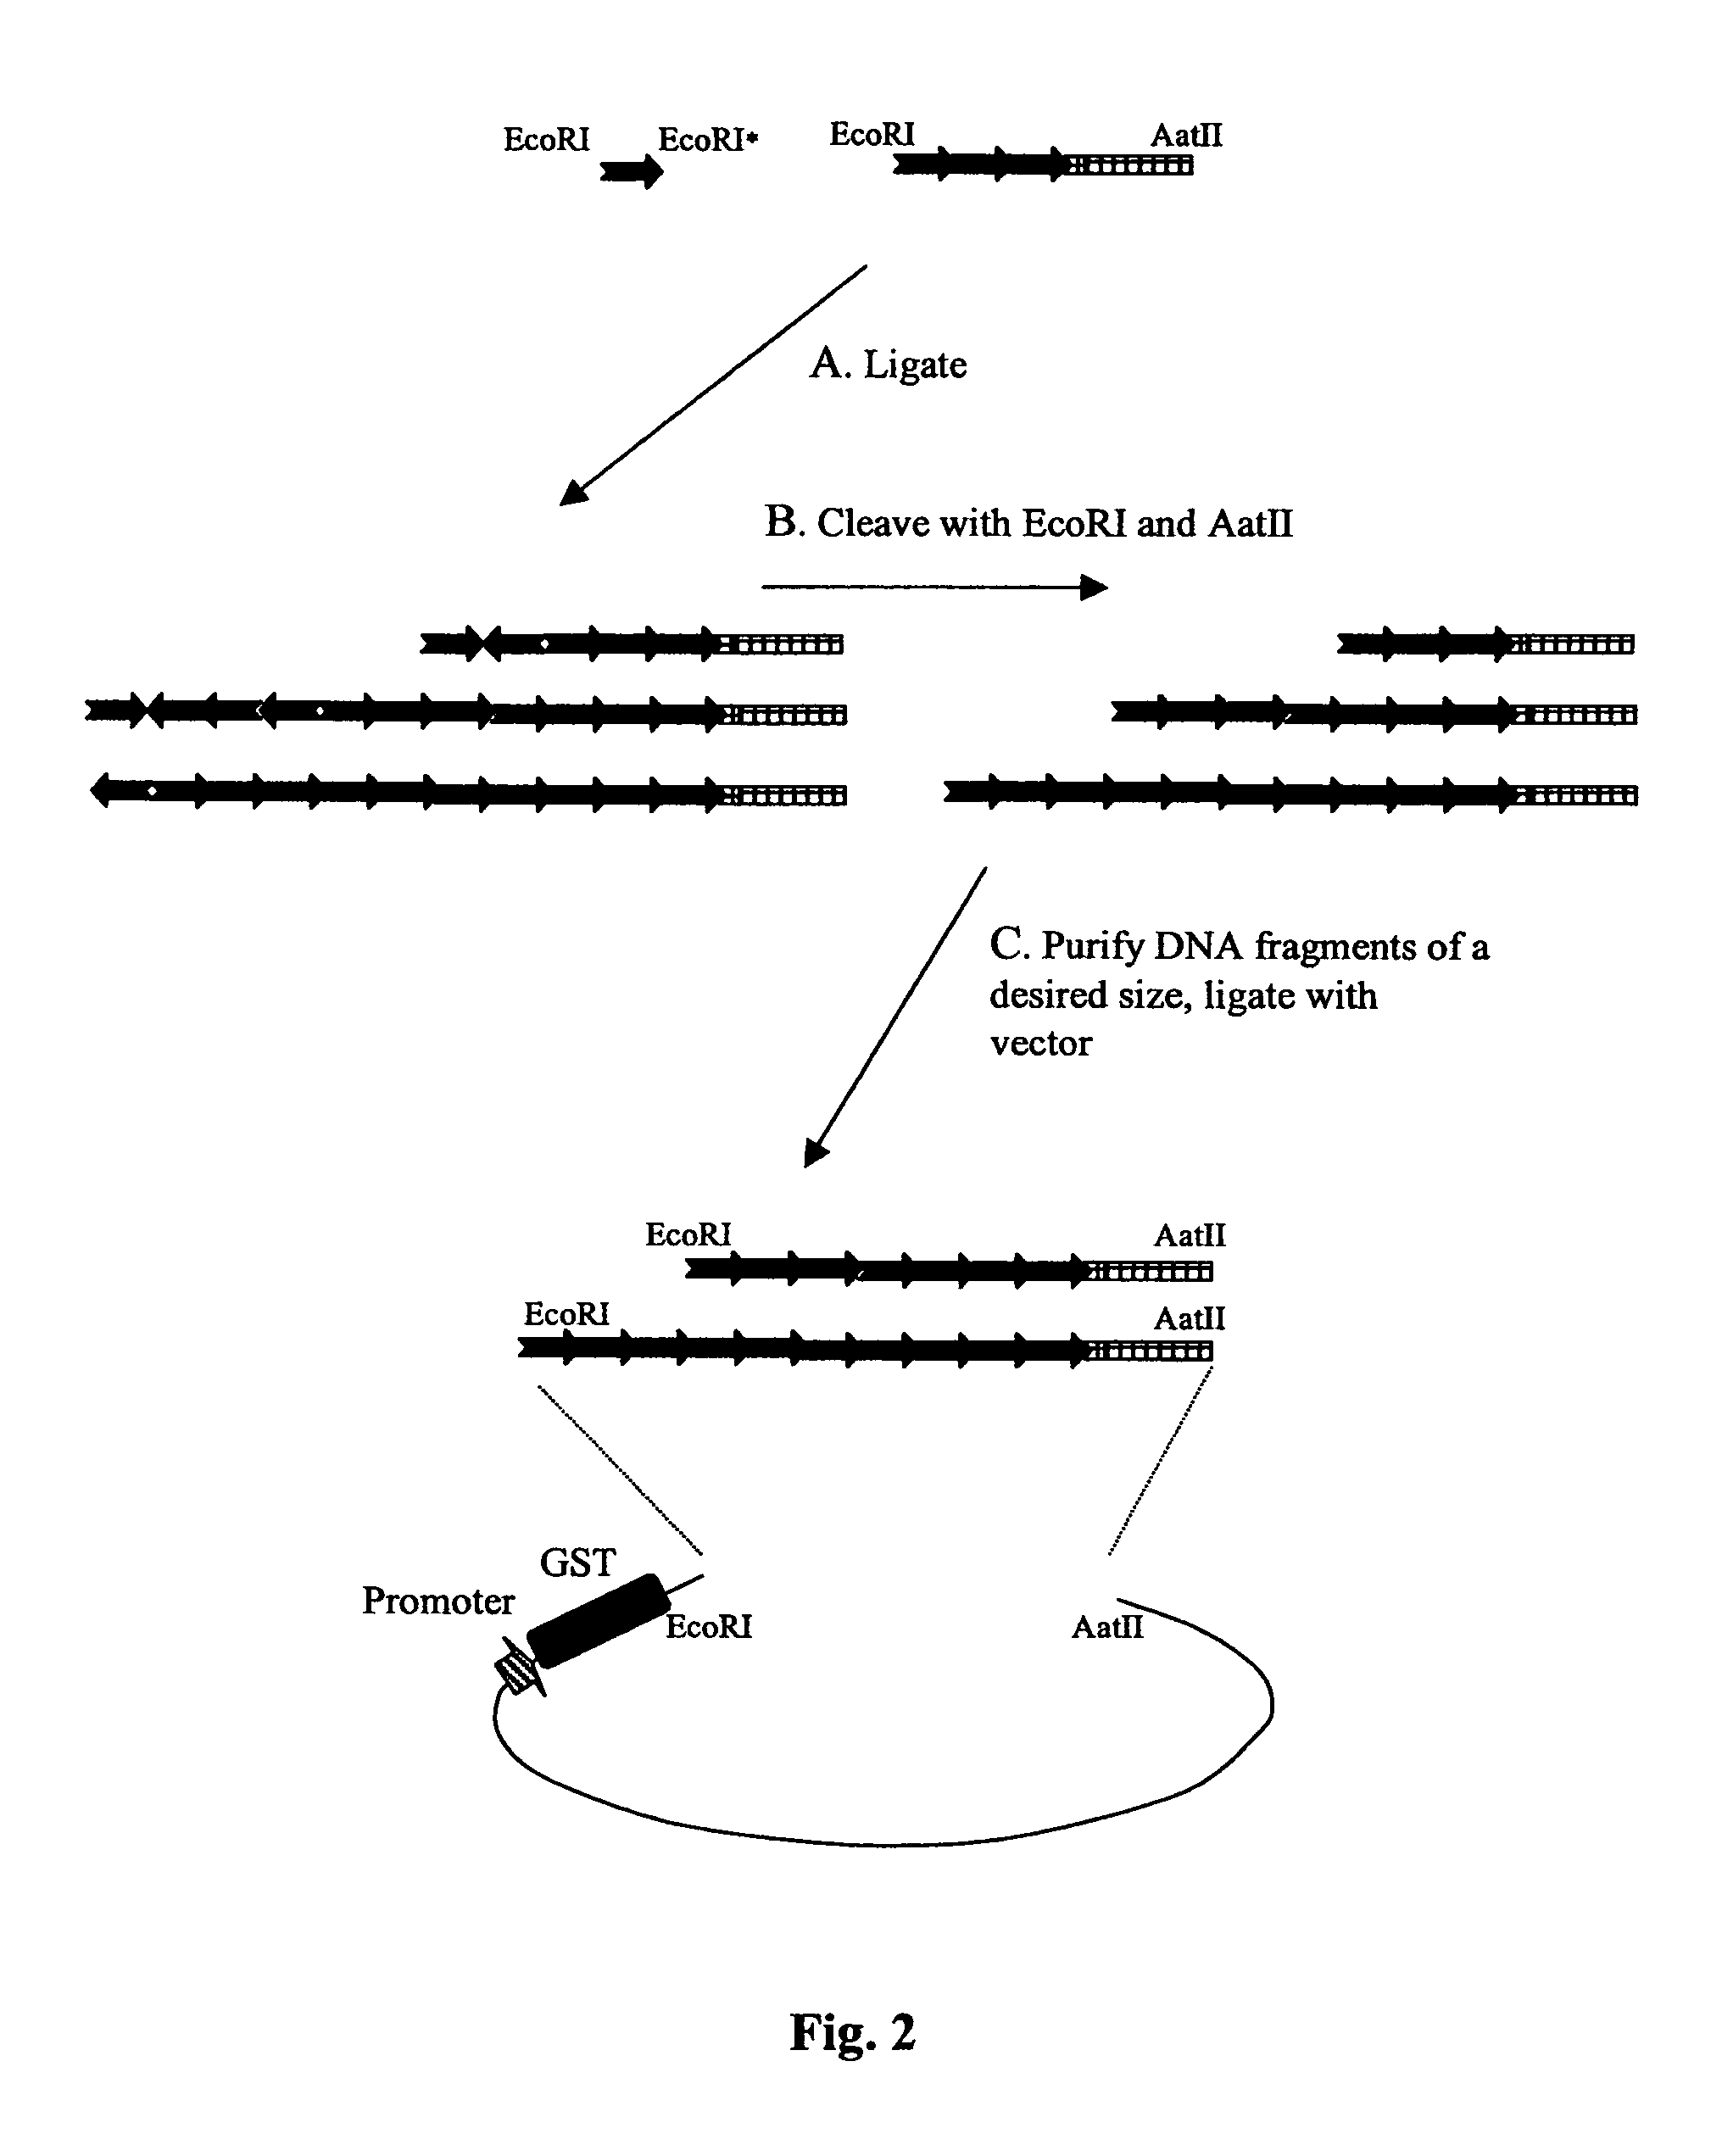 Protein kinase and phosphatase substrates and multiplex assays for identifying their activities